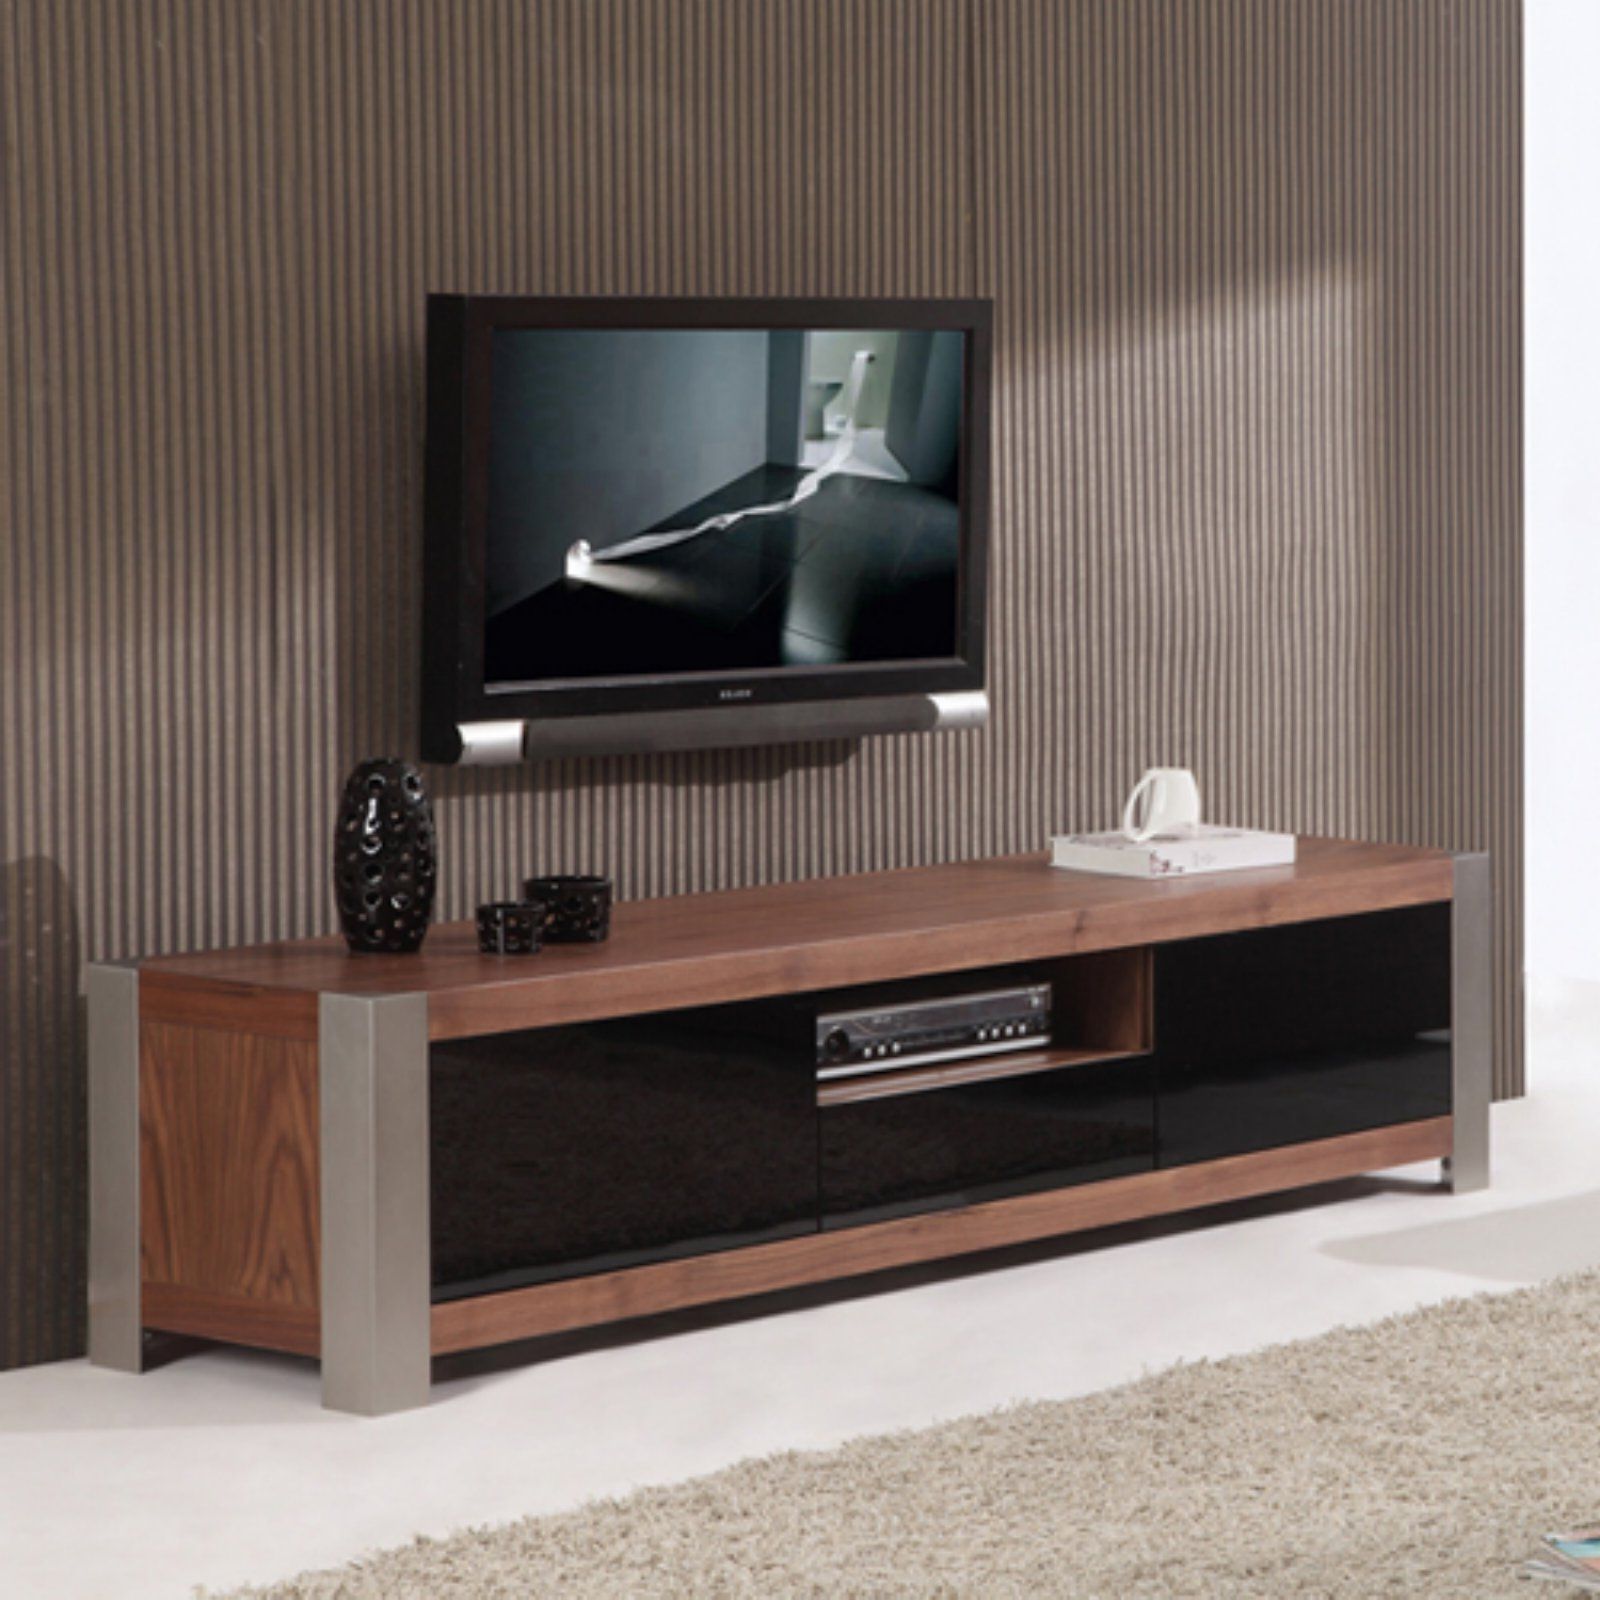 Trendy Brushed Stainless Steel Tv Stands Pertaining To Stainless Steel Tv Stand – Ideas On Foter (View 5 of 10)